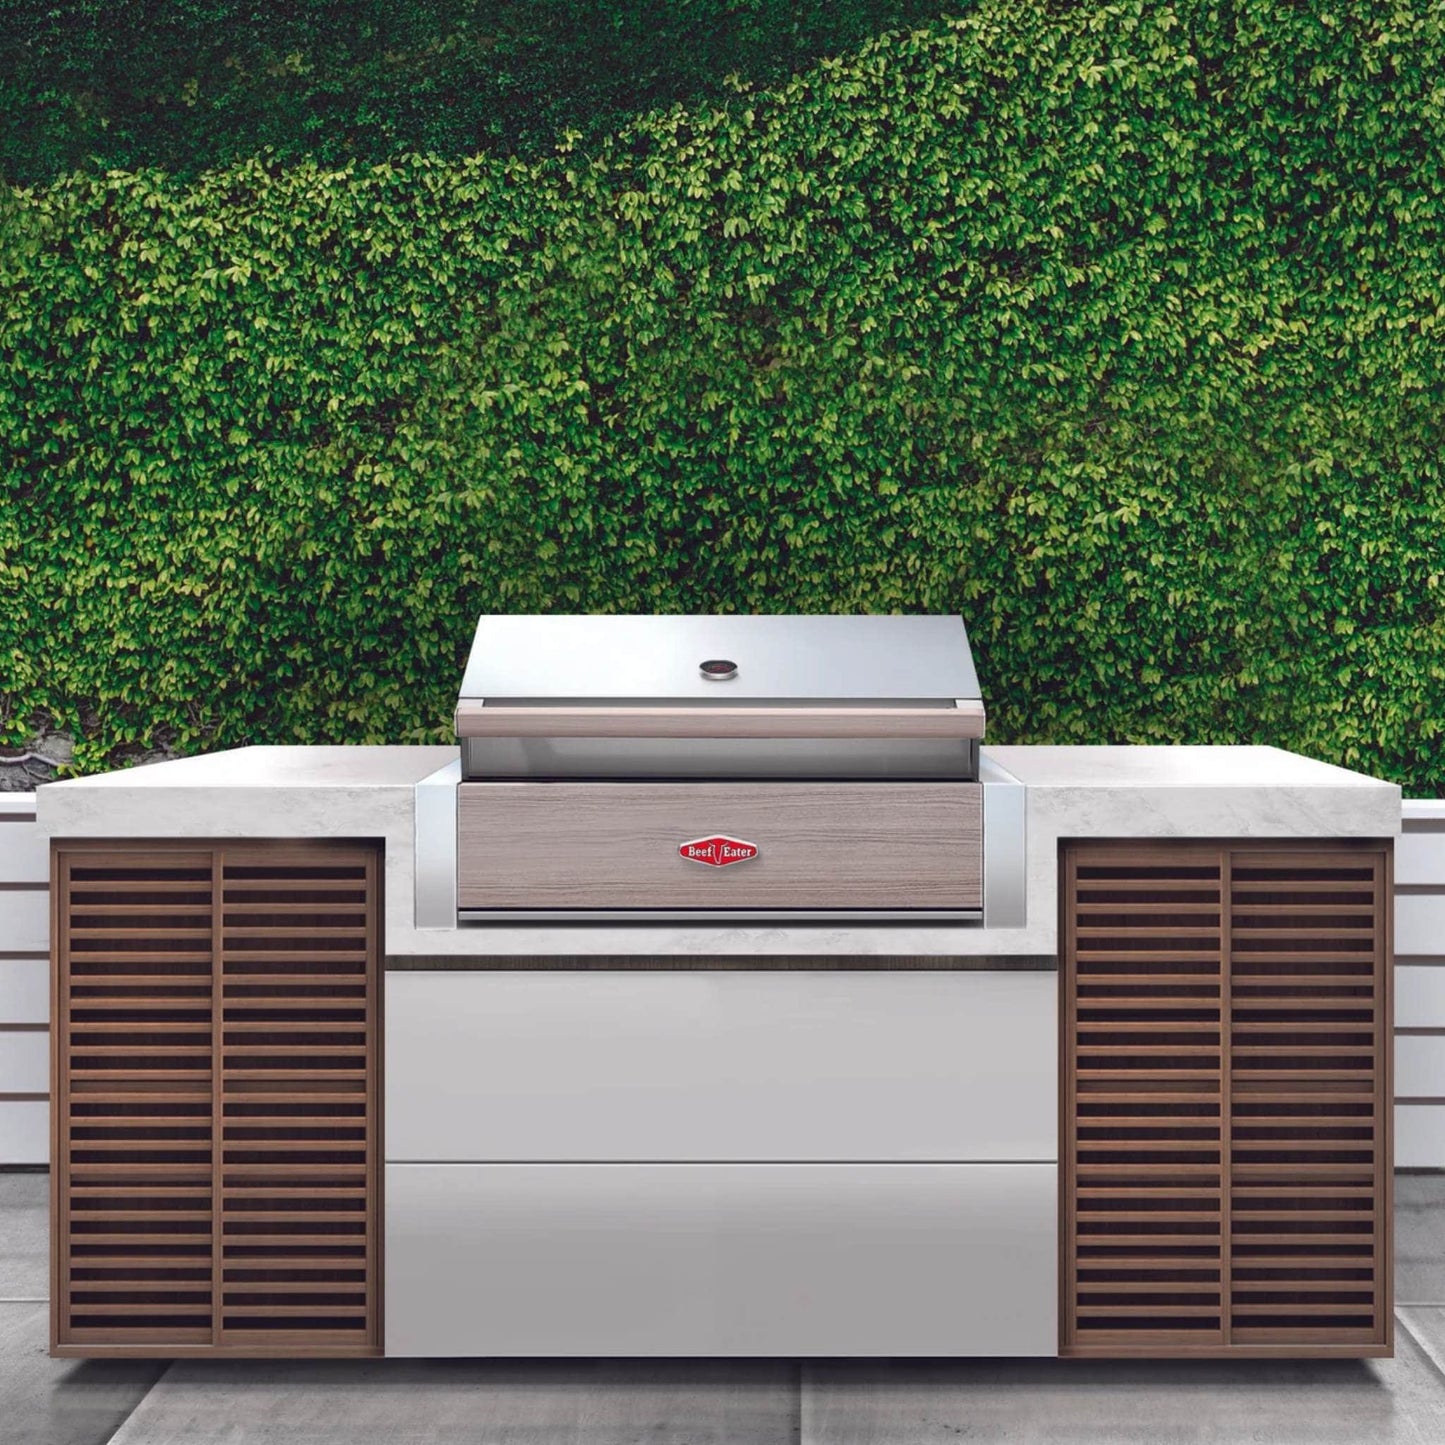 BeefEater 1500 Series - 5 Burner Built In BBQ